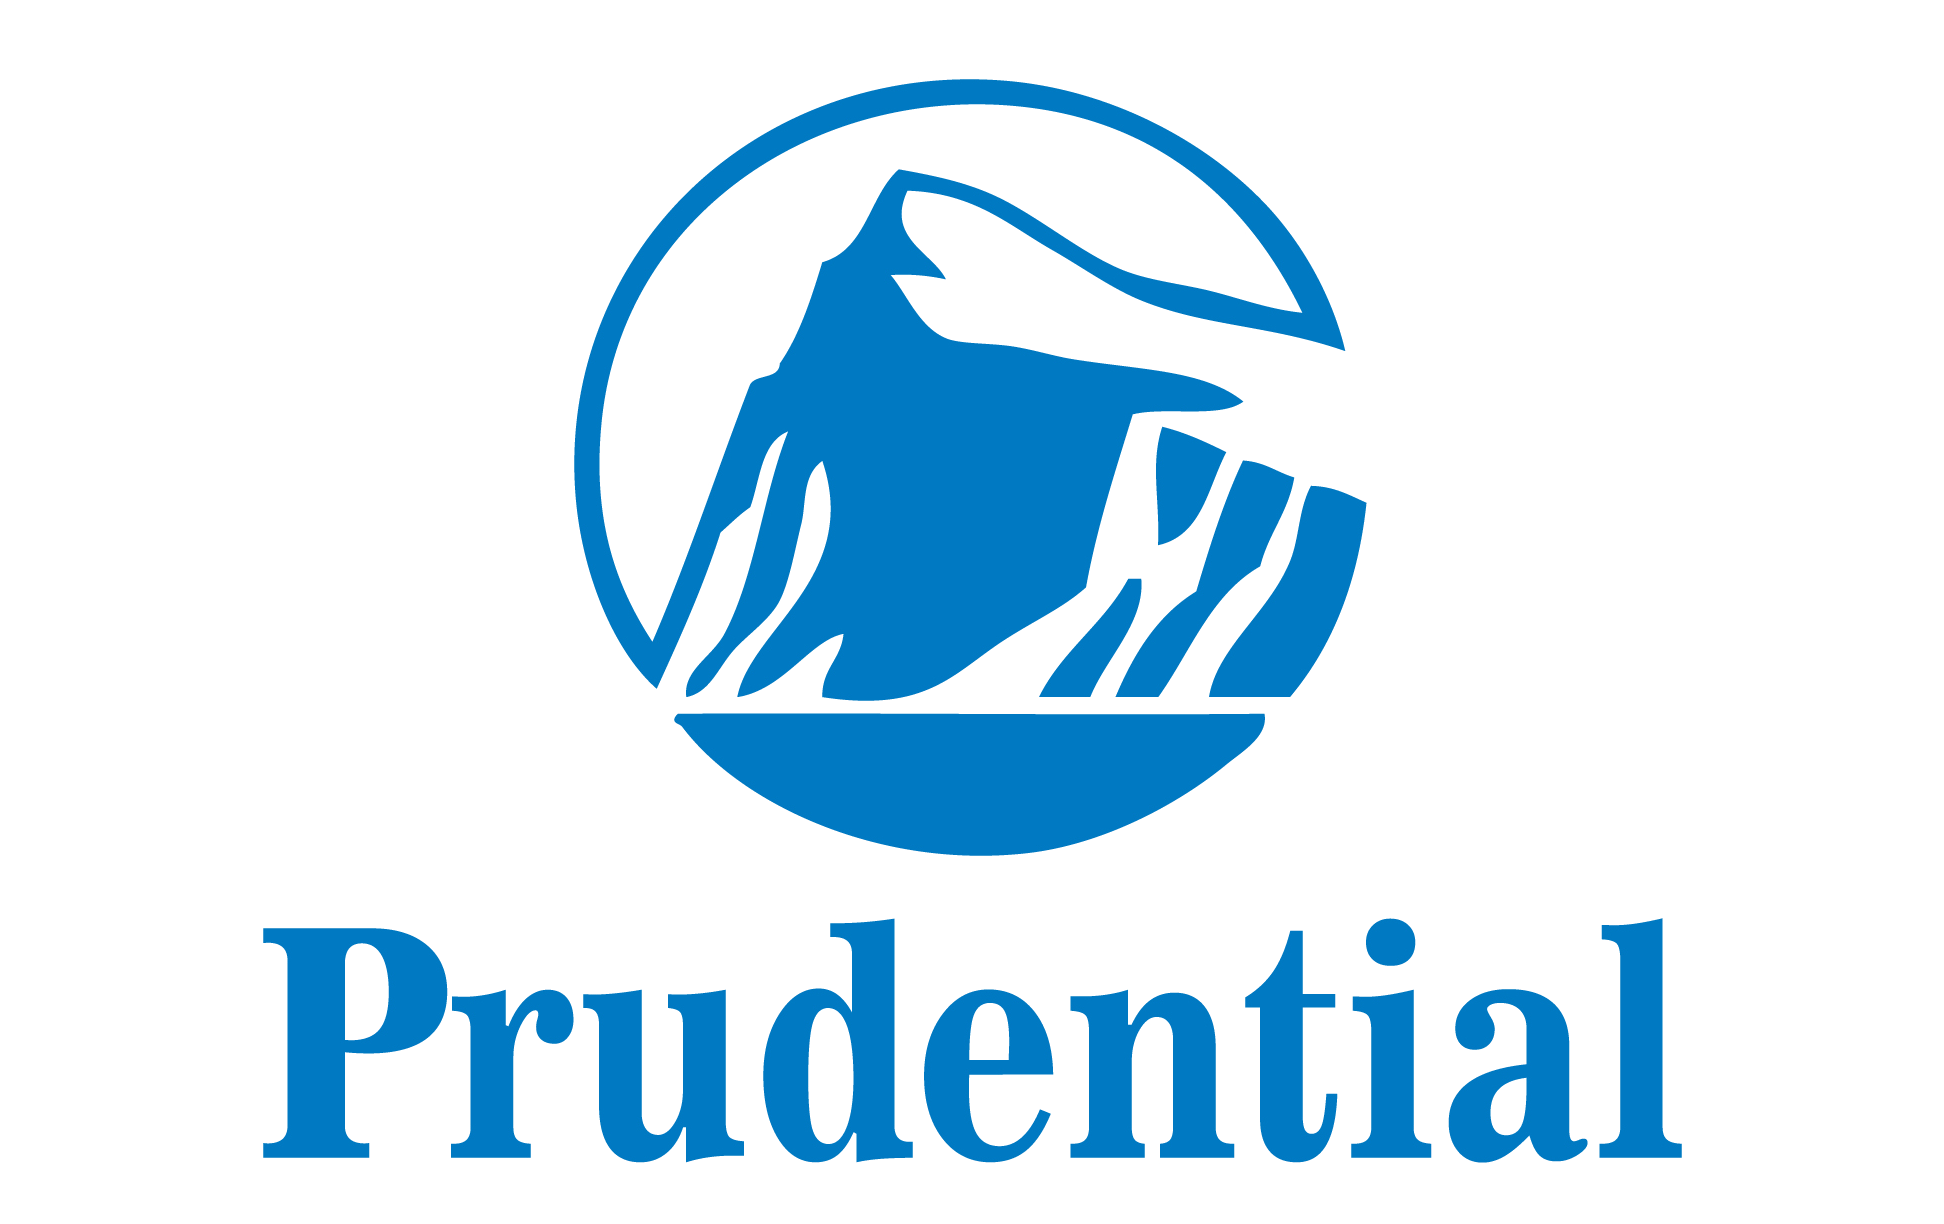 Prudential.png